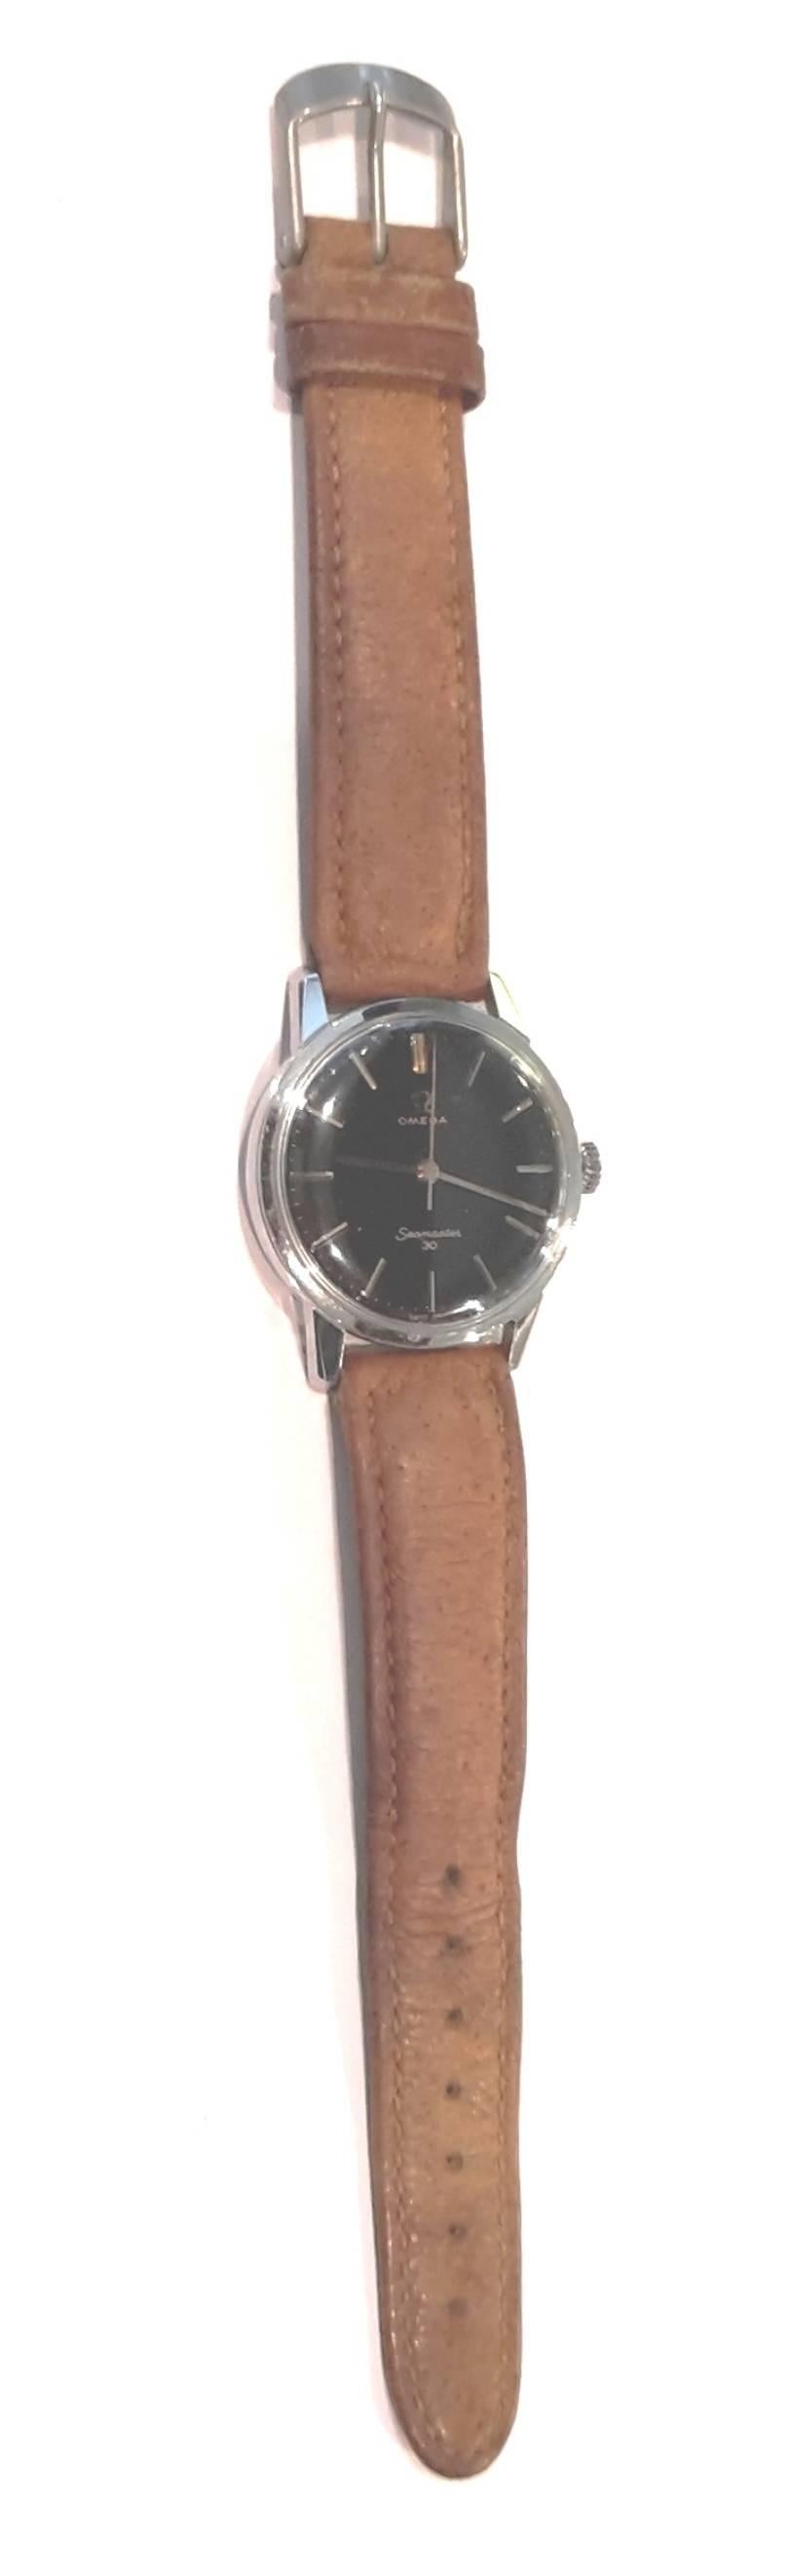 Omega Stainless Steel Black Dial Wristwatch 1950s 1